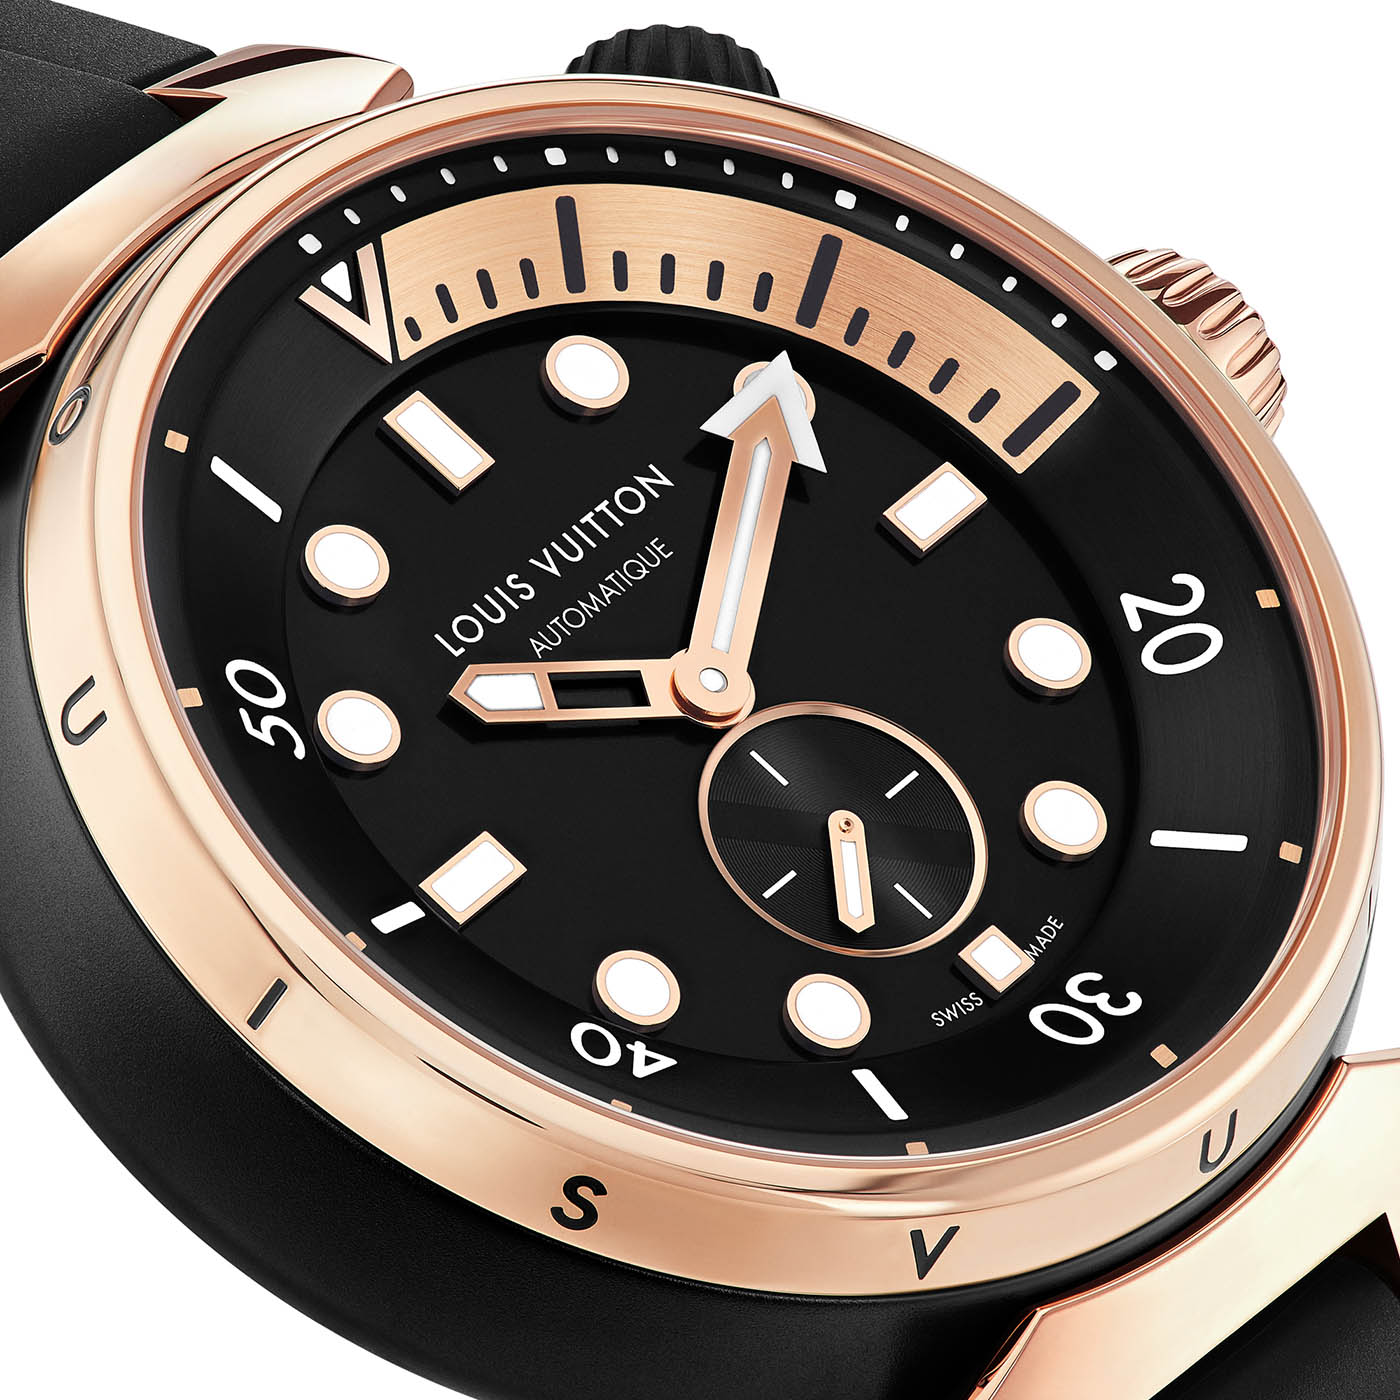 Louis Vuitton Debuts Their Tambour Street Diver Watch - The Luxury